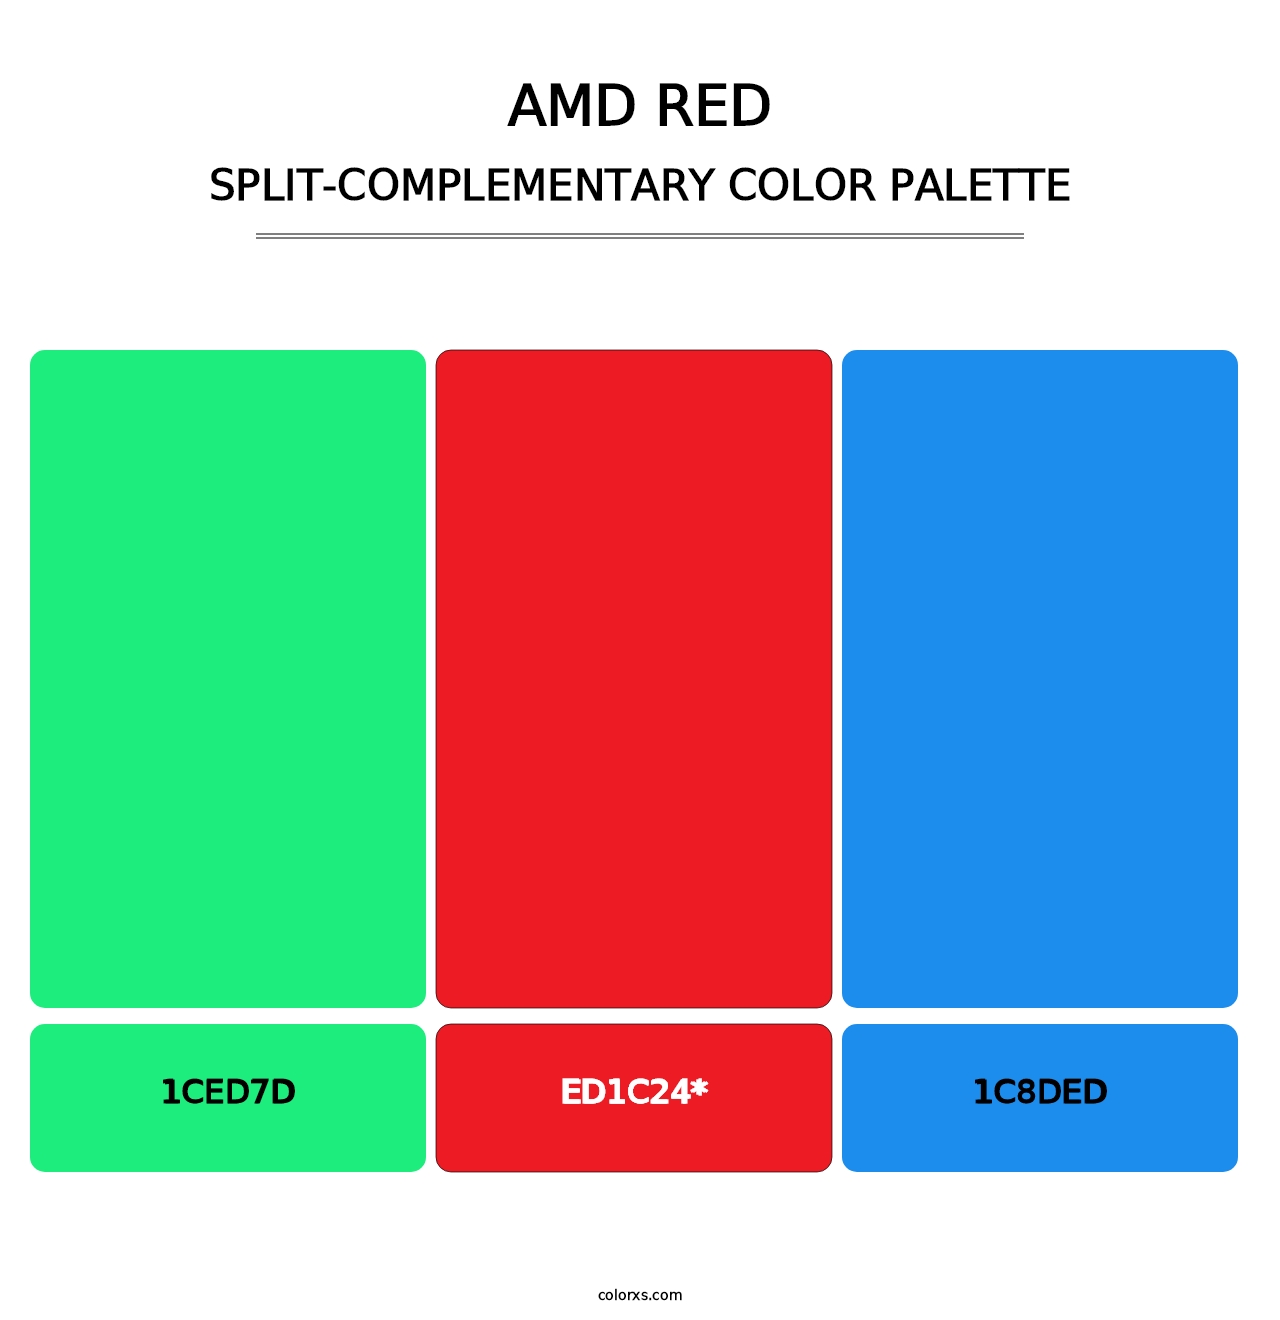 AMD Red - Split-Complementary Color Palette